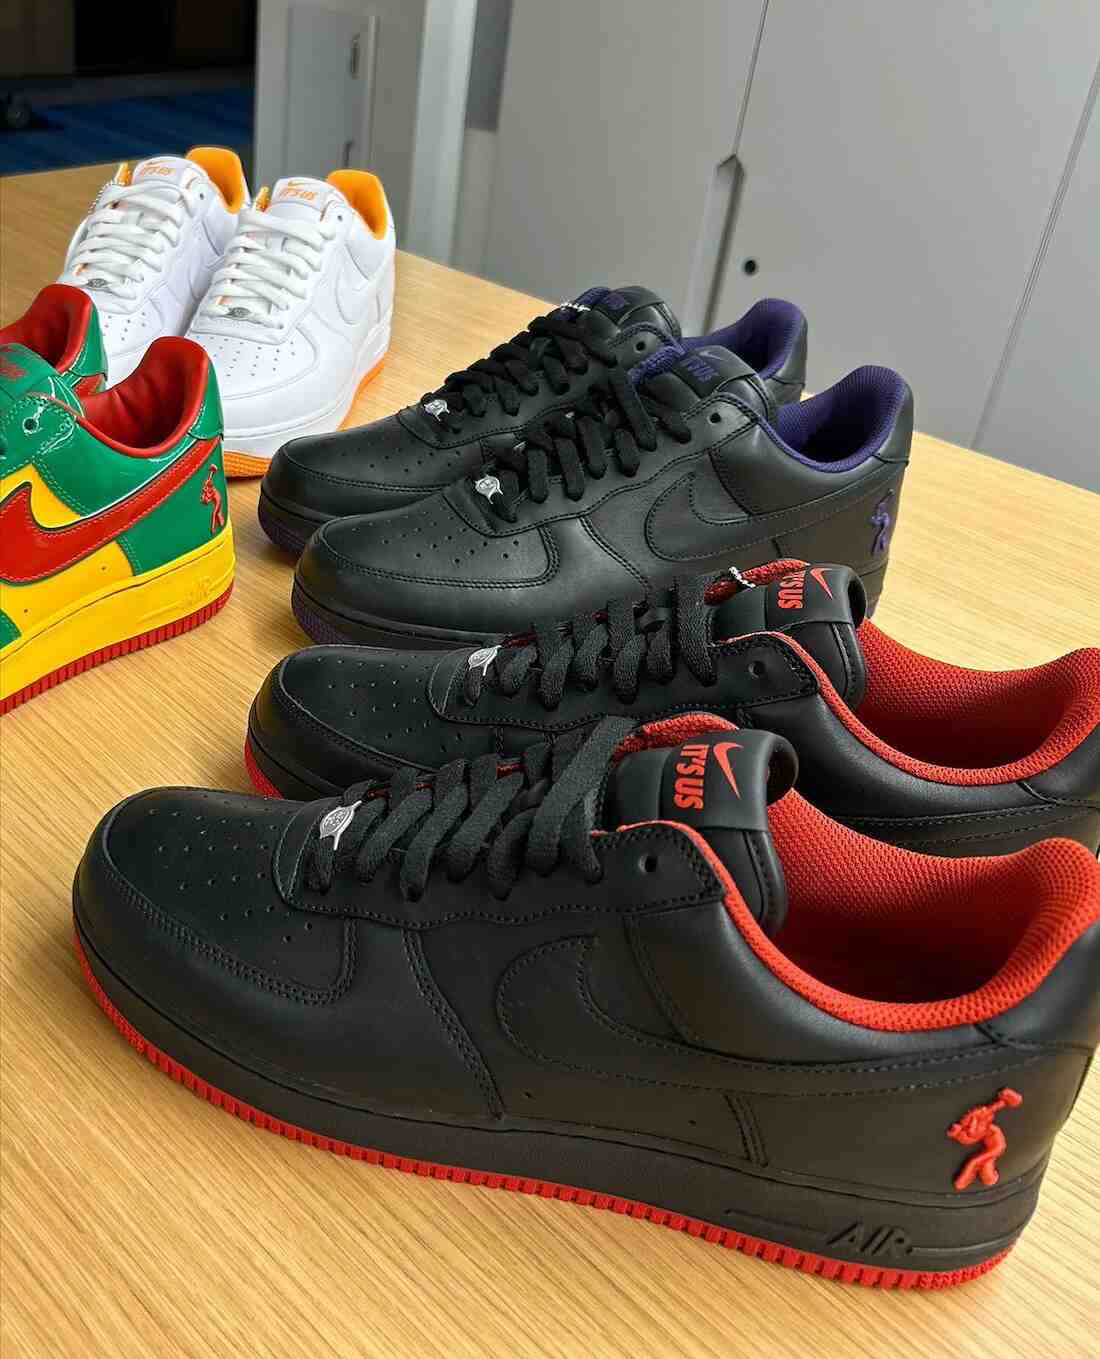 Nike Air Force 1 Low, Nike Air Force 1, Lil Yachty - Lil Yachty 首次亮相耐克 Air Force 1 Low "Coachella" PE